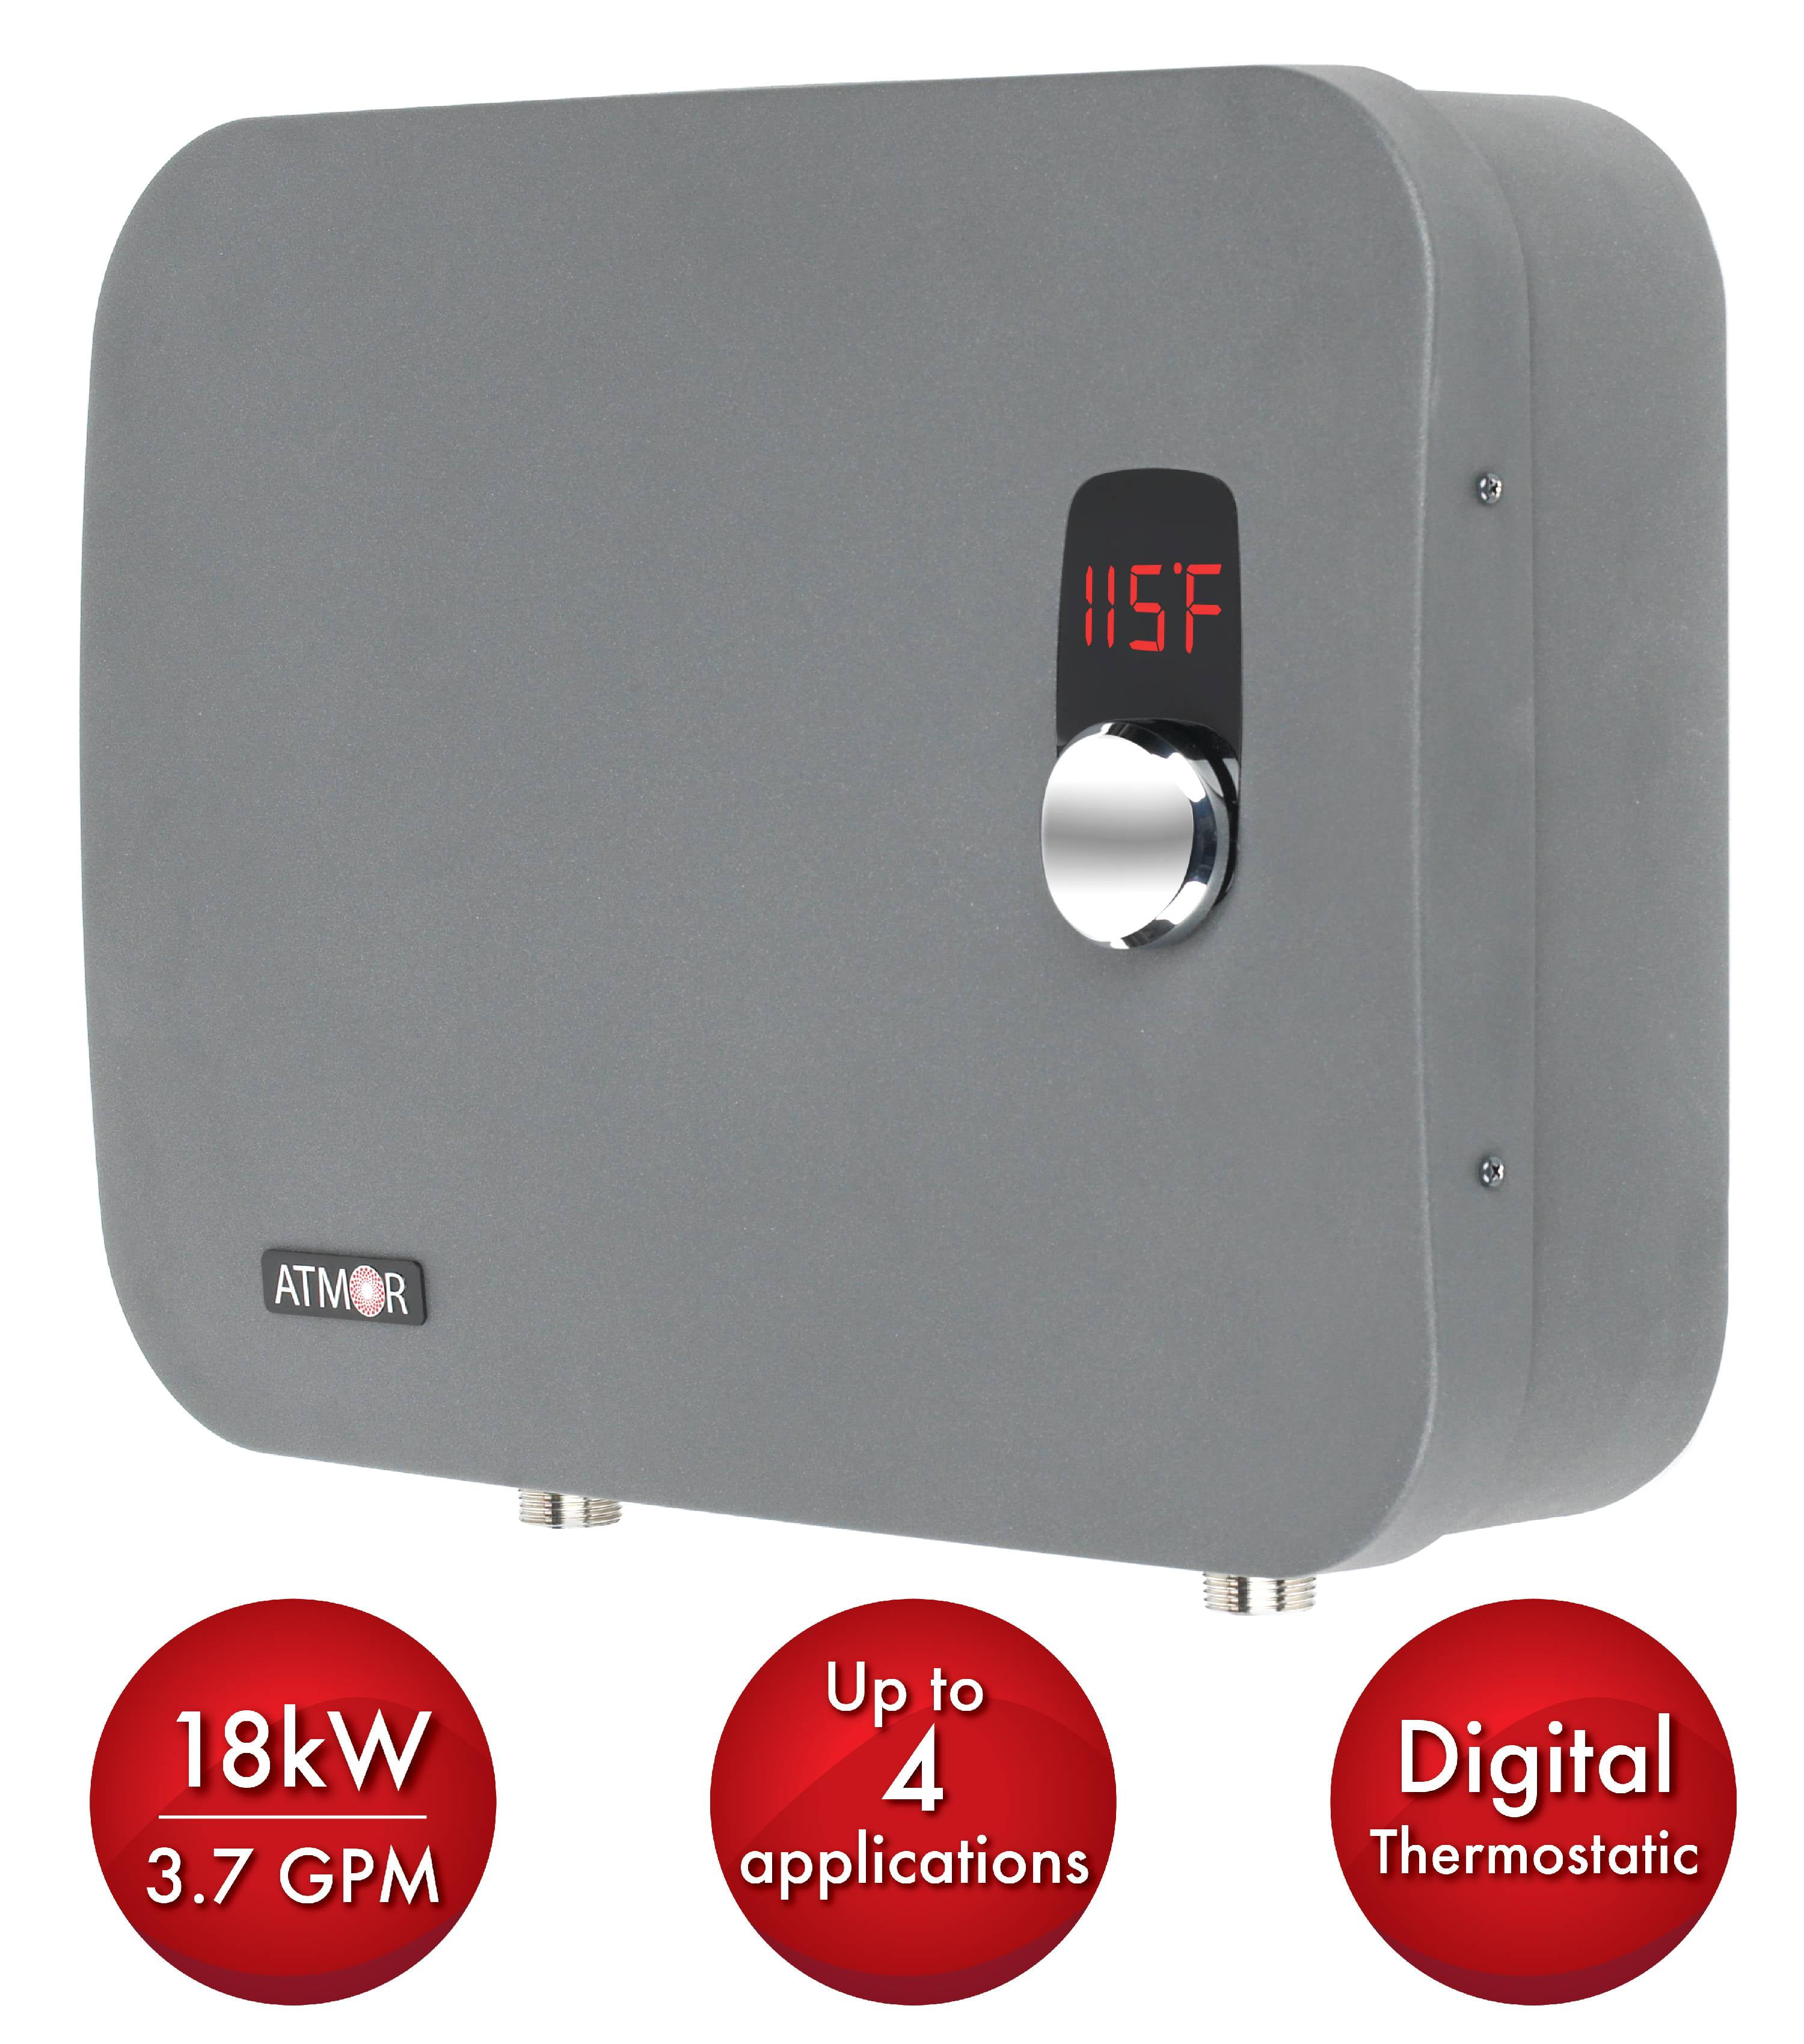 Atmor ThermoPro 18kW/240-Volt 3.7 GPM Stainless Steel Digital Tankless  Electric Water Heater with Self-Modulating Technology - Walmart.com